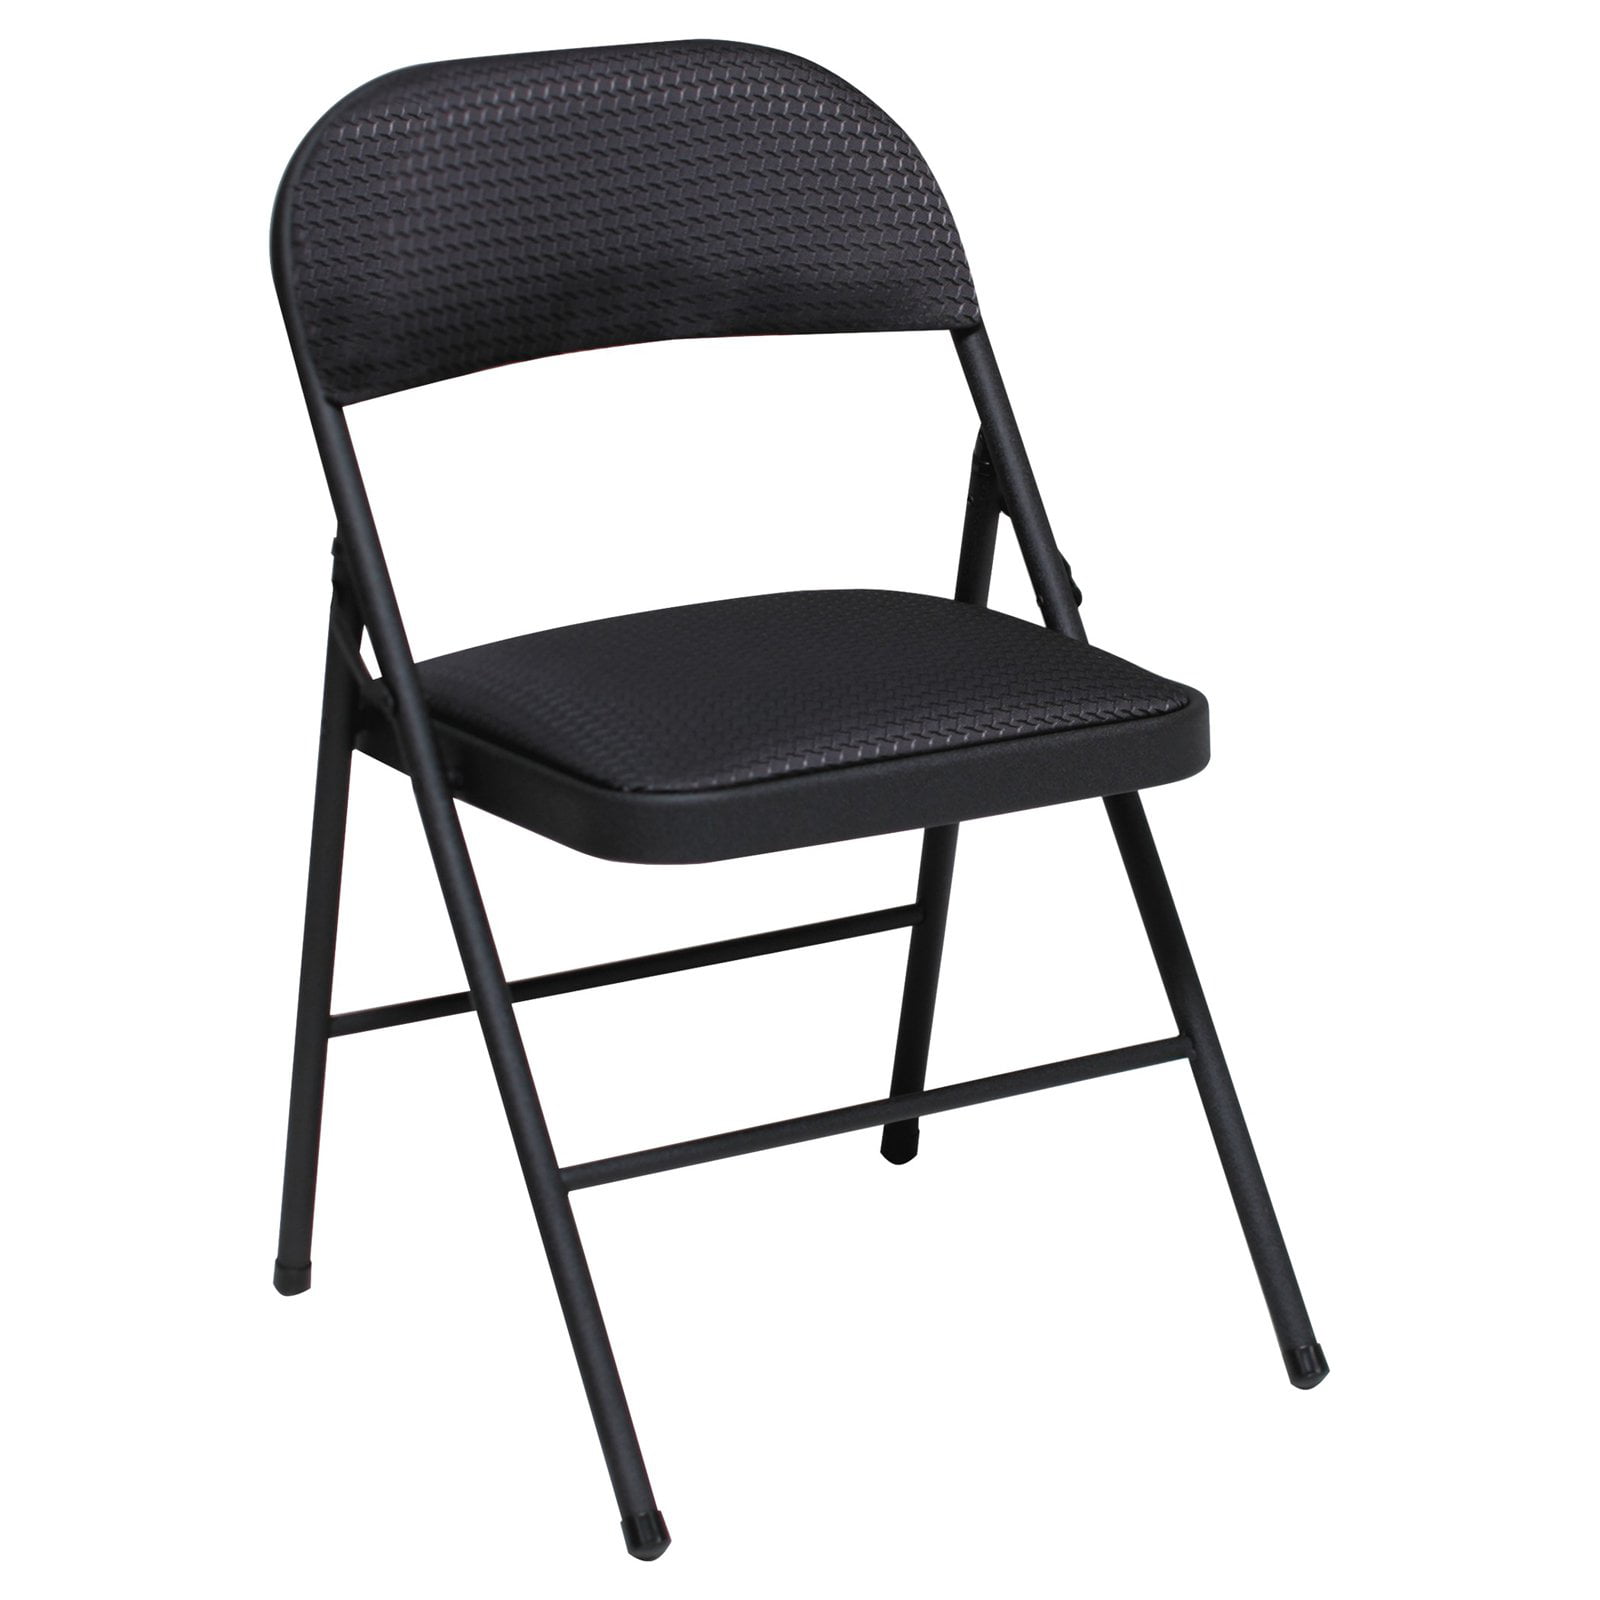 Cosco Deluxe Metal and Fabric Folding Chair, Set of 4 - Walmart.com